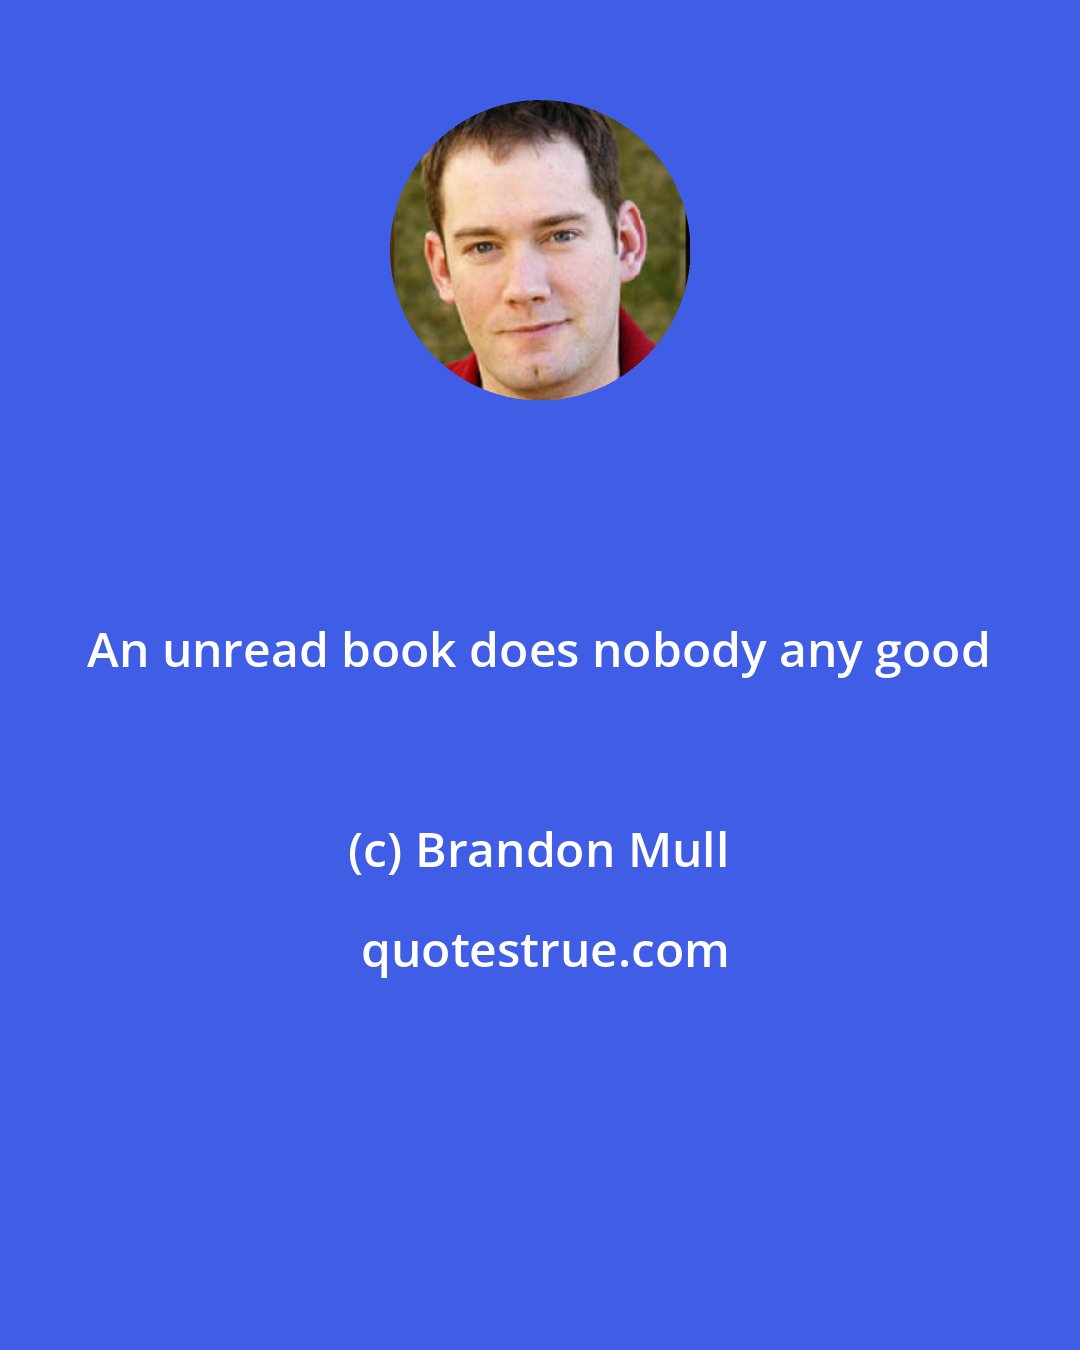 Brandon Mull: An unread book does nobody any good